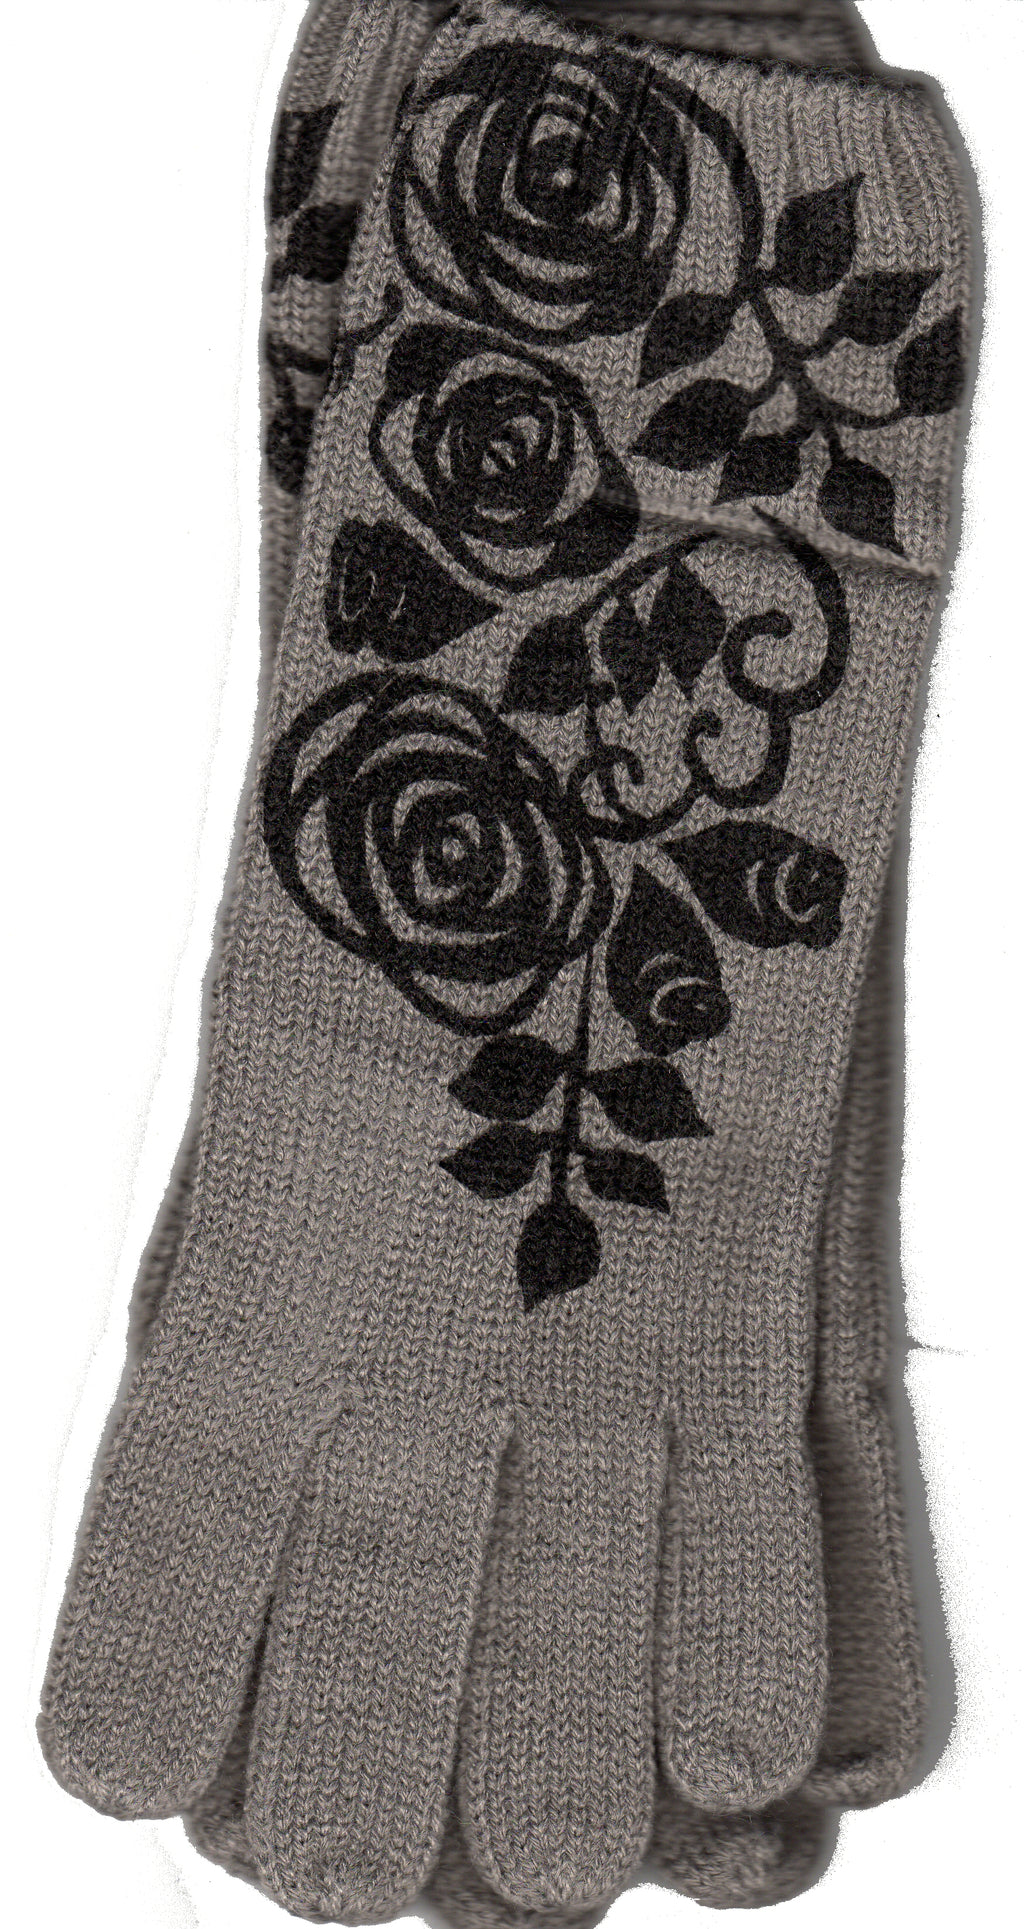 Grey Rosebud Gloves from Zazou has a Black stencil print set of Roses and Rosebuds on the top of the Glove.